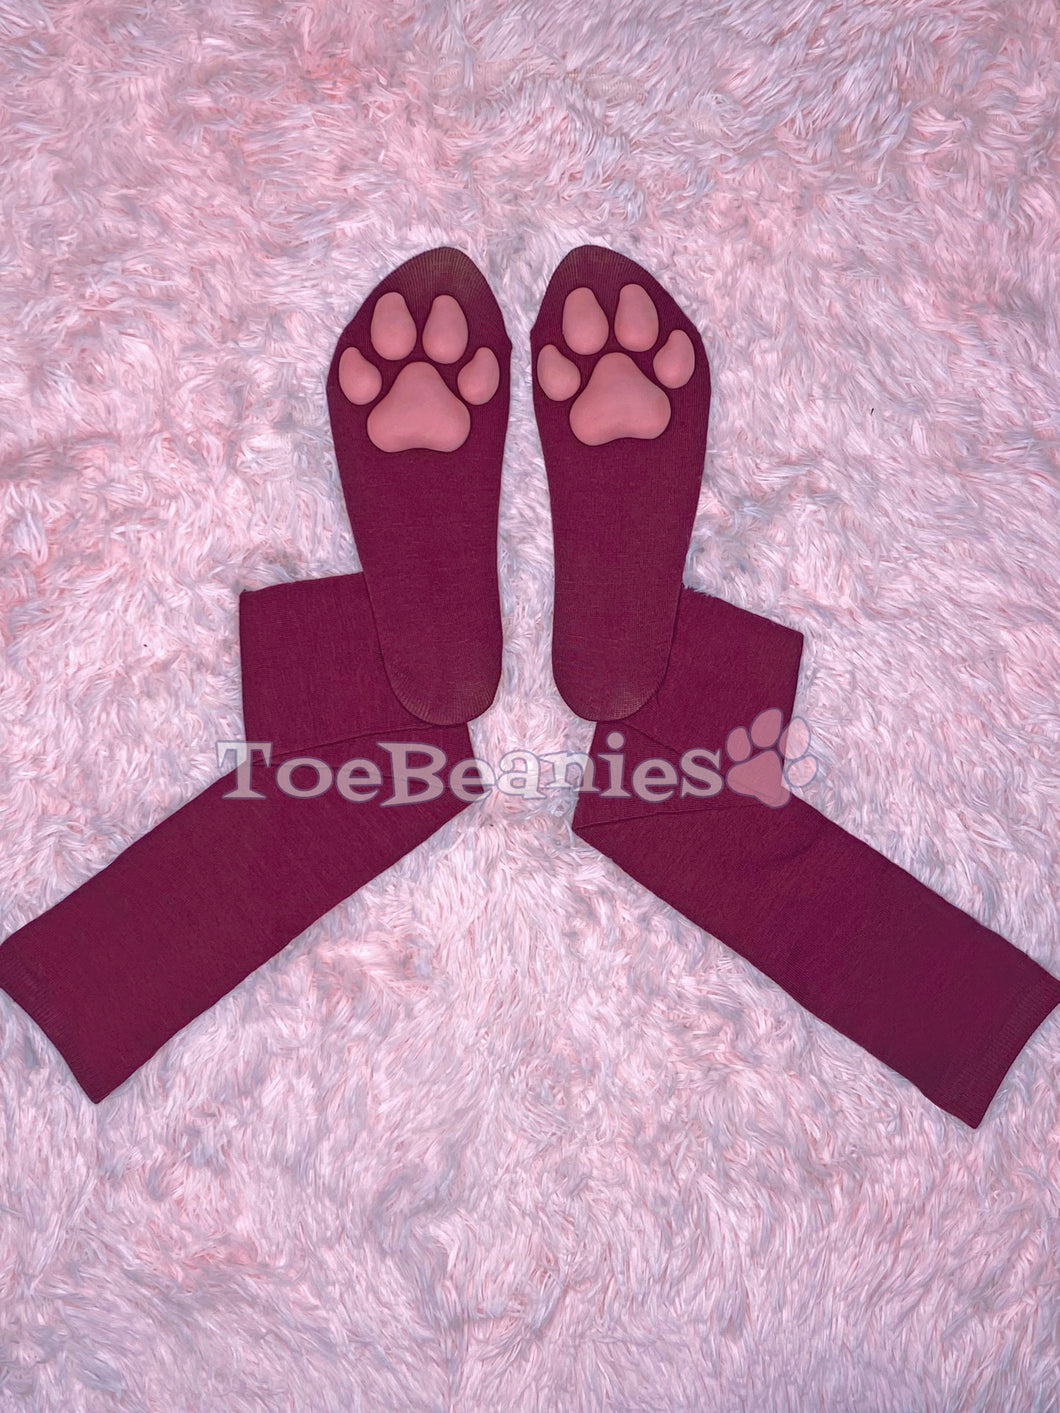 Solid Maroon Socks with Pink ToeBeanies